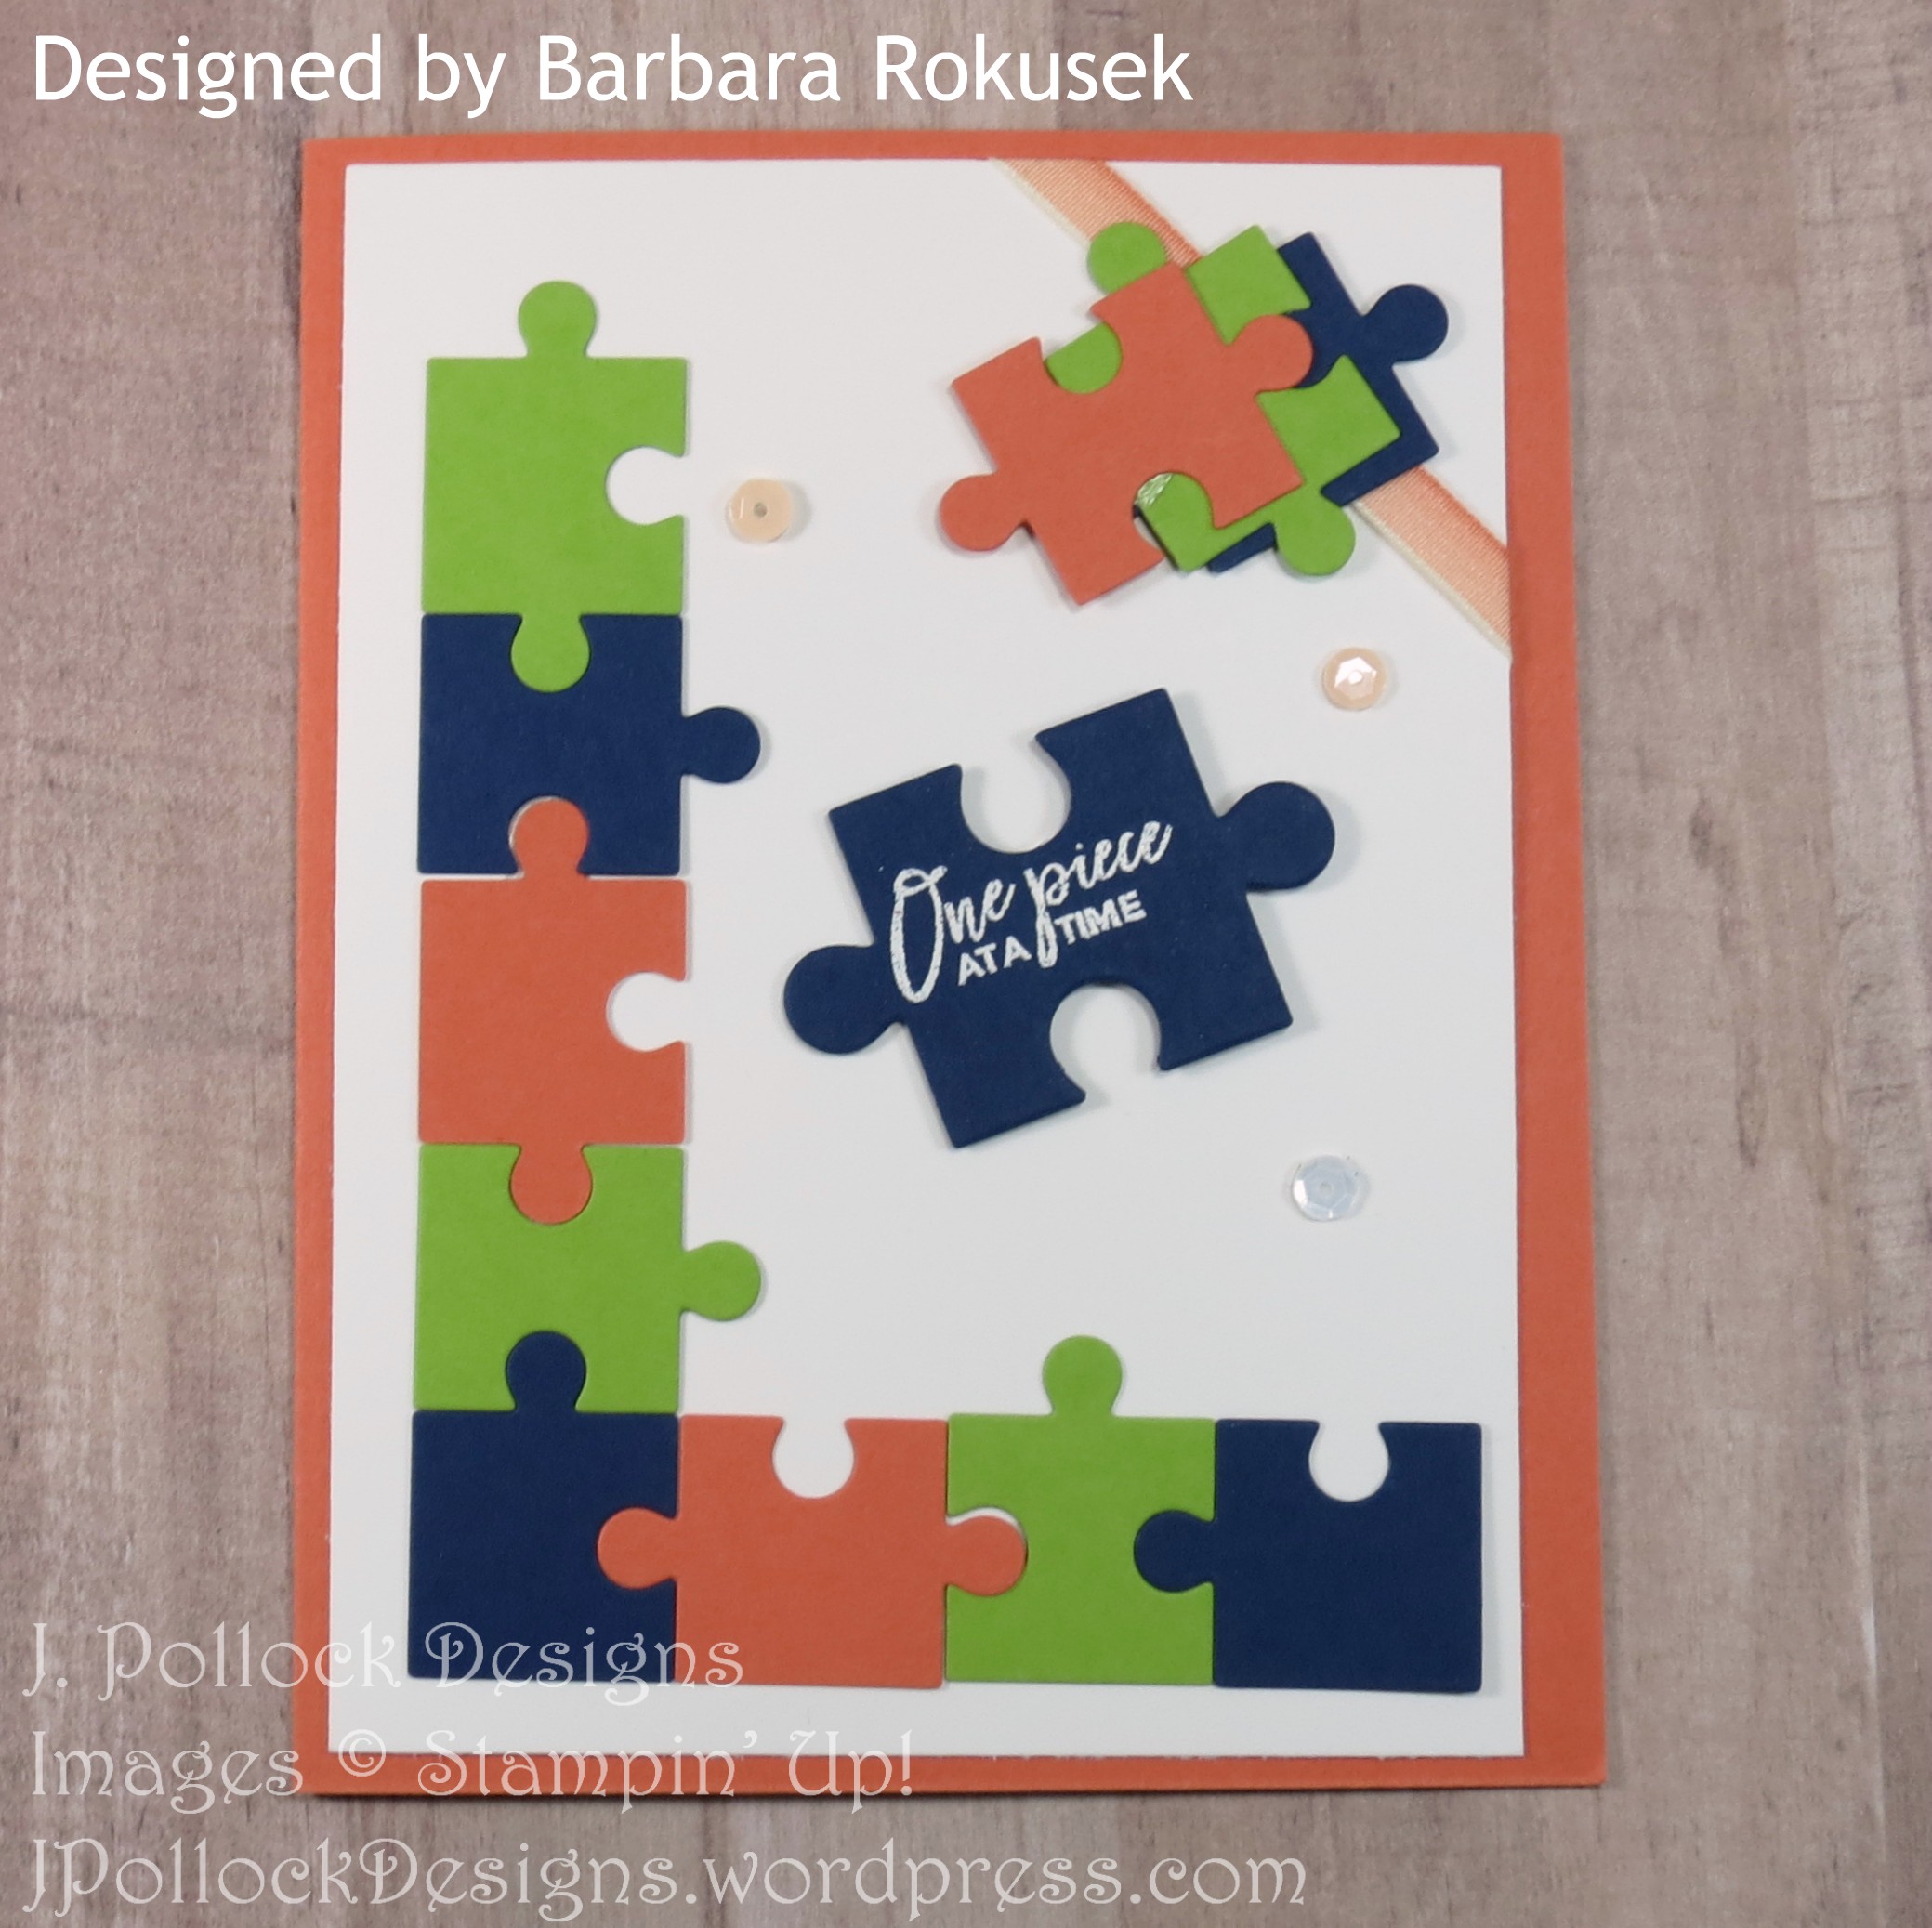 J. Pollock Designs - Stampin' Up! - Swap Cards March 2019